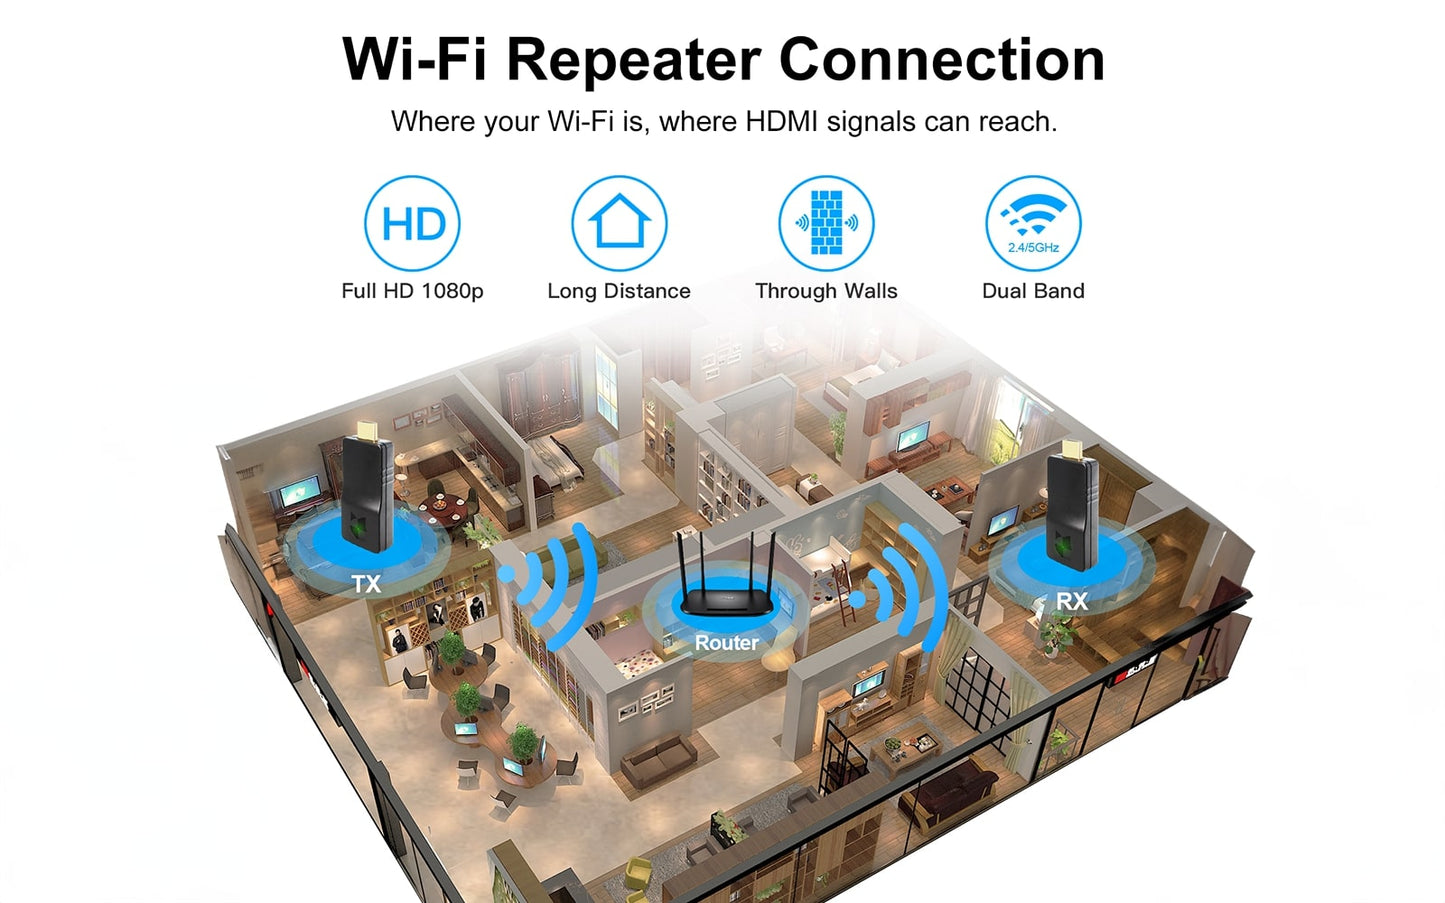 whe-10t wireless hdmi extender transmitter-wifi repeater conneciton